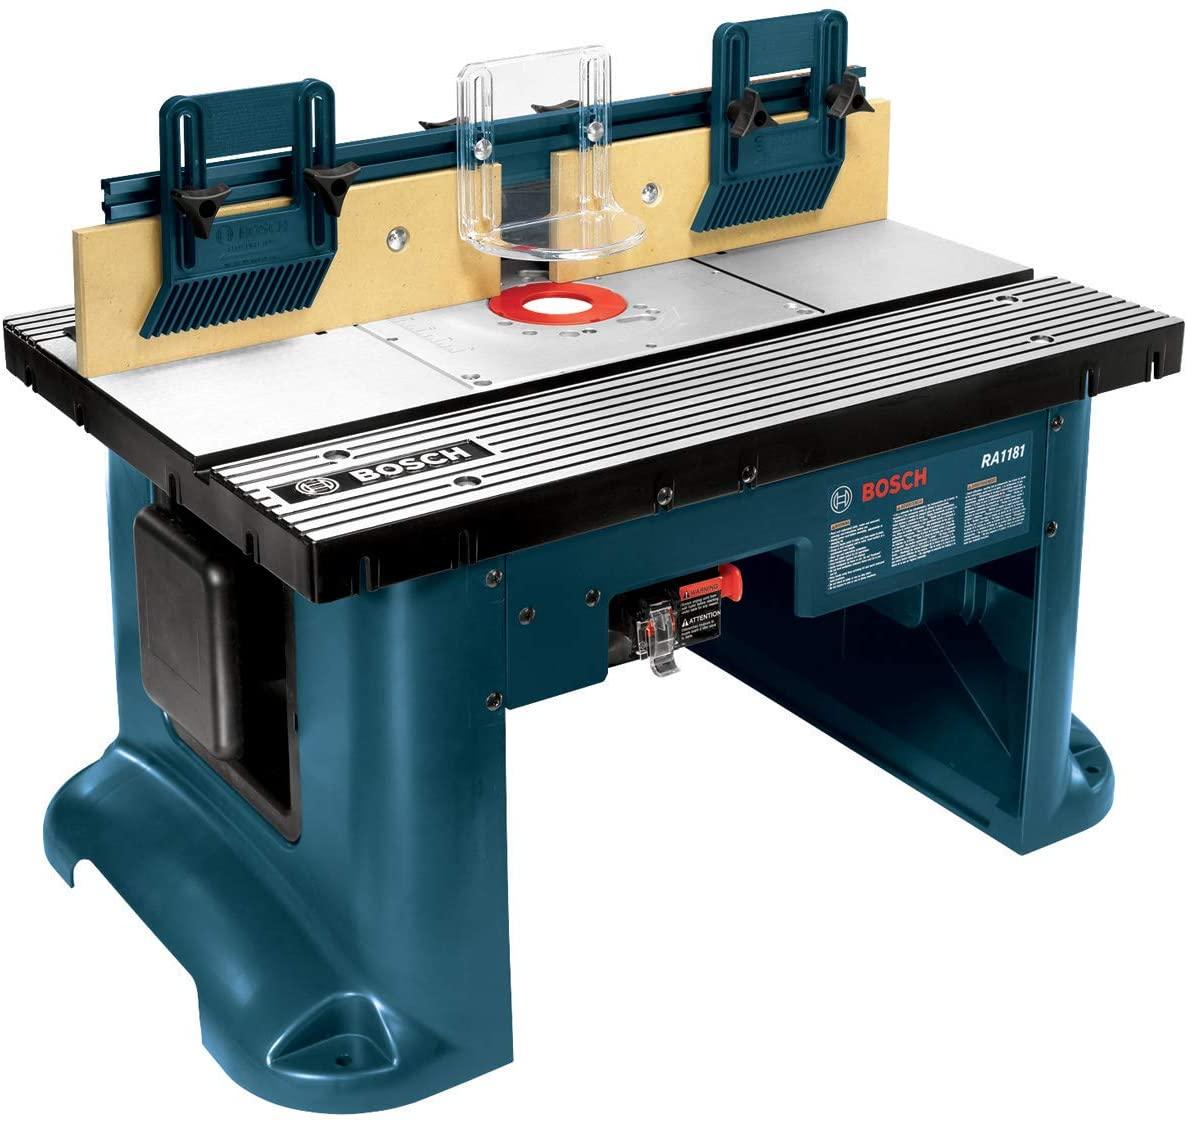 Bosch Benchtop Router Table for $159 Shipped